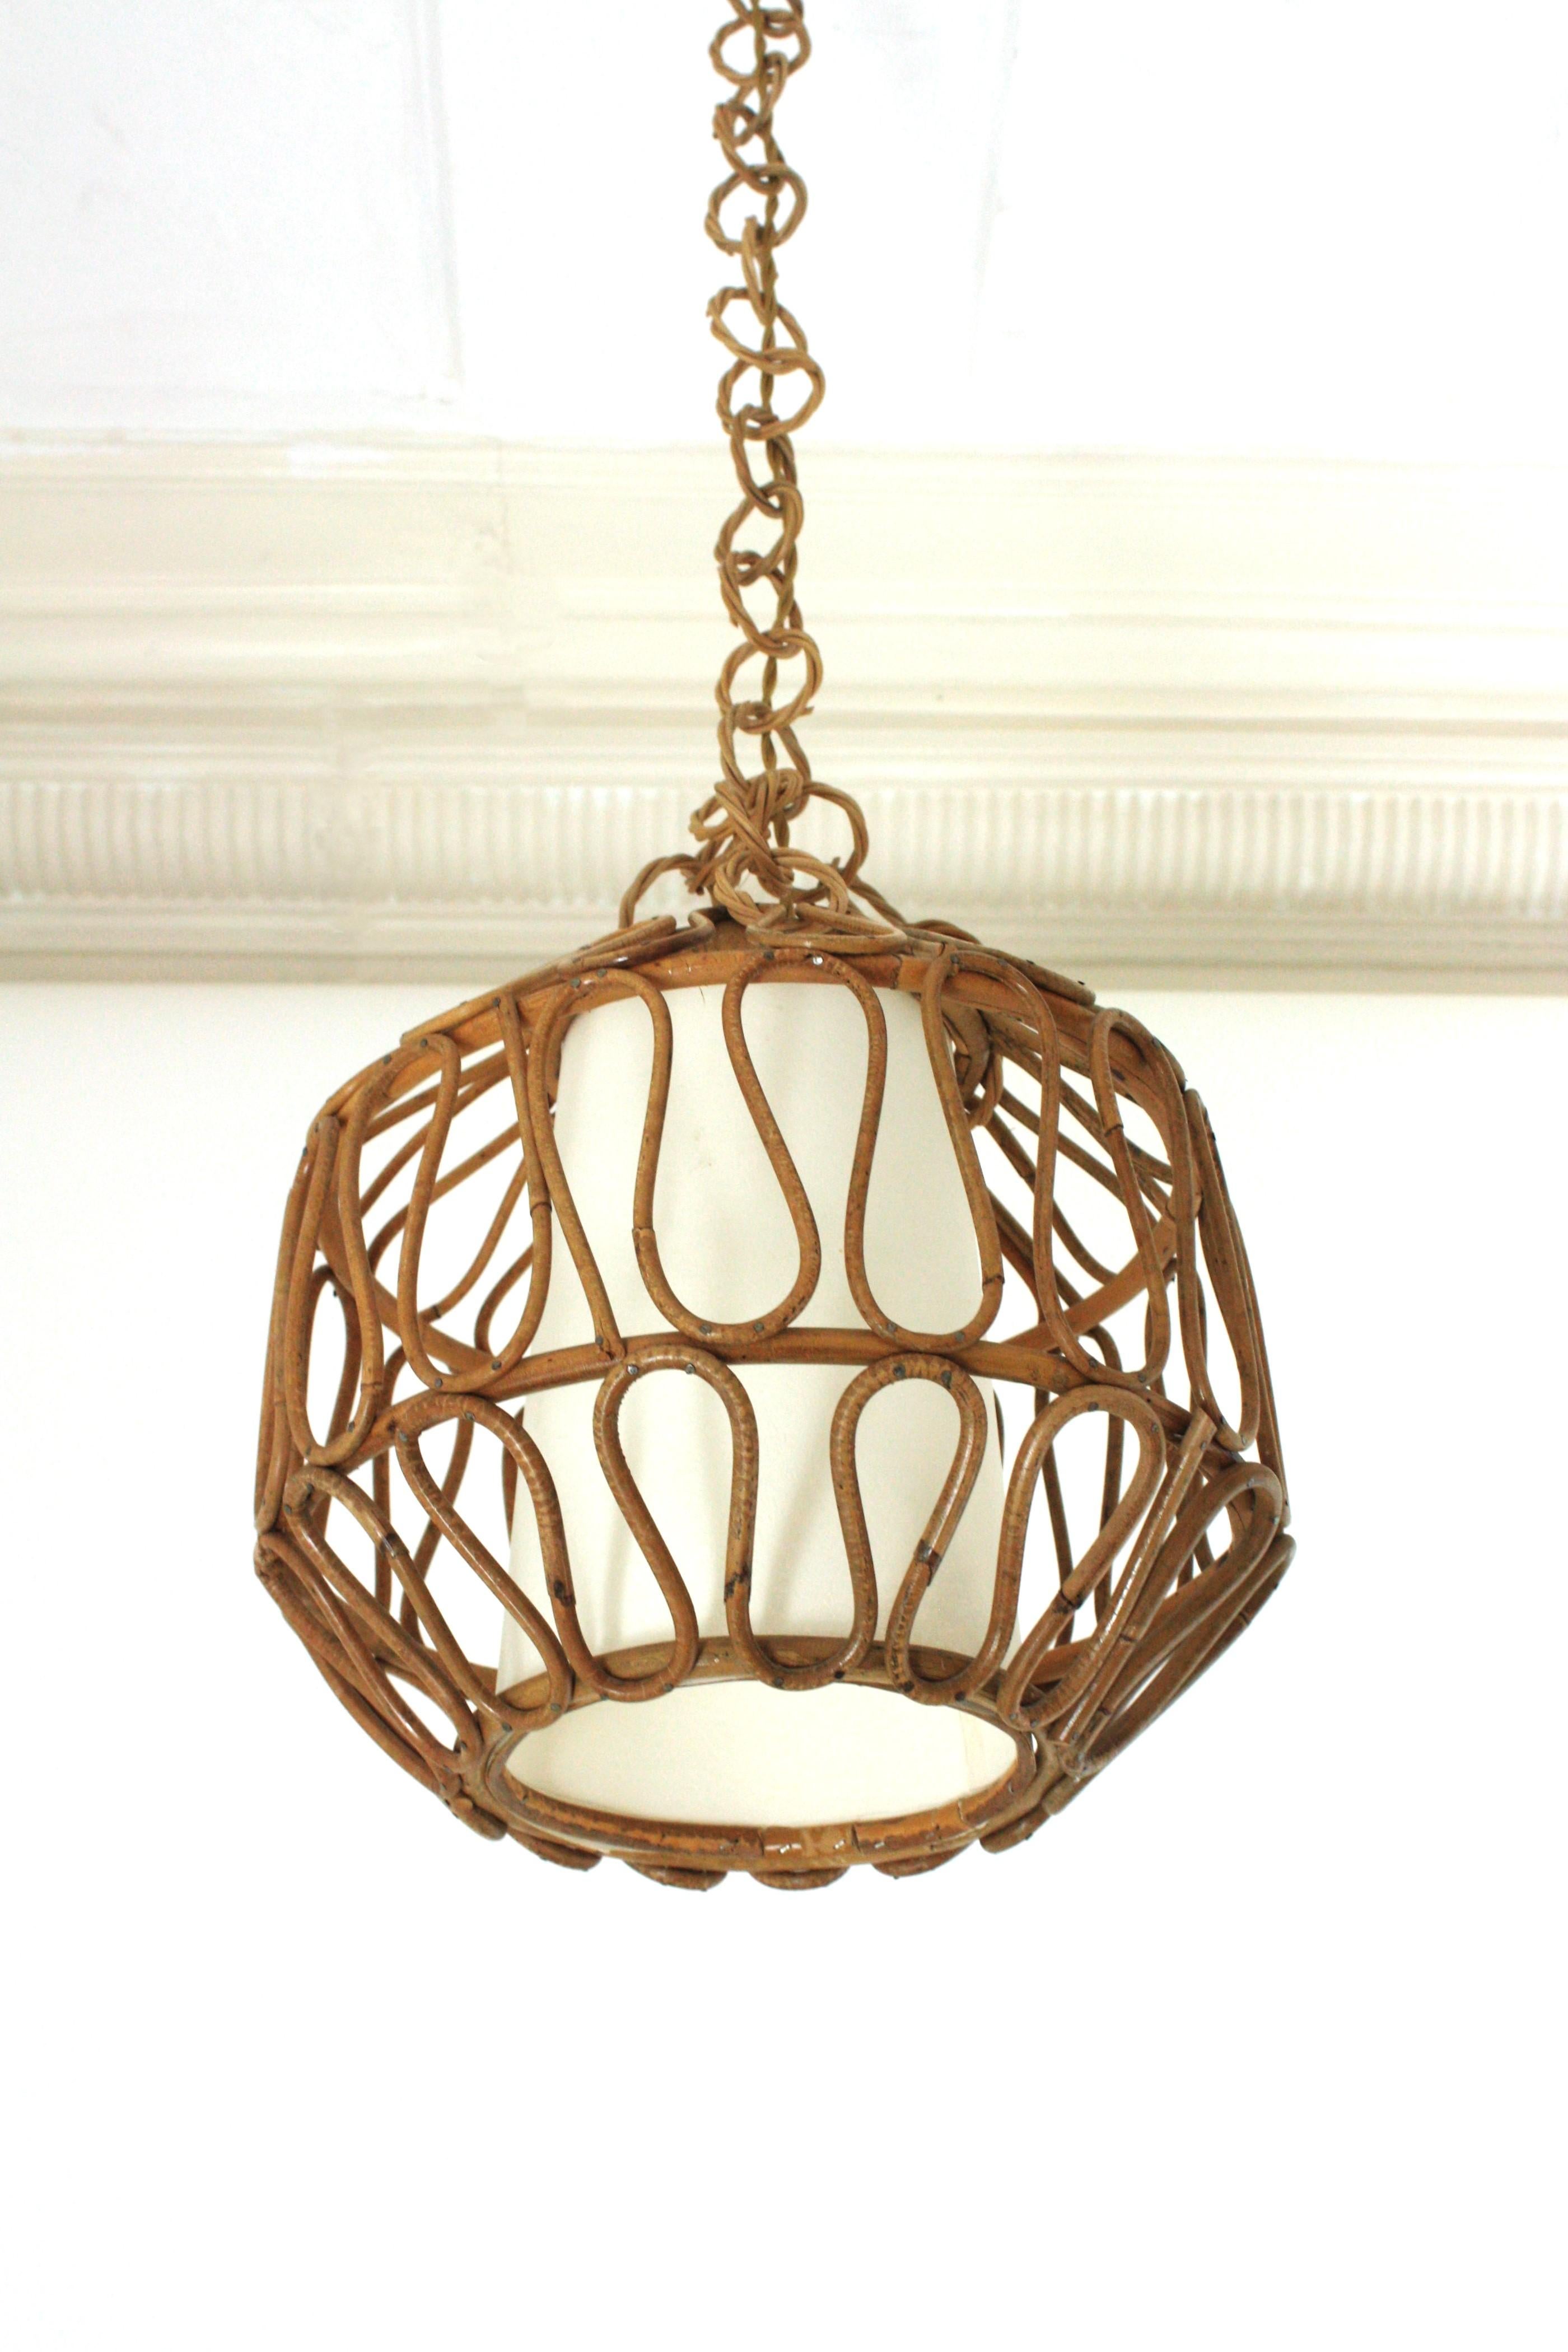 Rattan Globe Pendant Light or Lantern with Loop Details, Spain, 1960s In Good Condition For Sale In Barcelona, ES